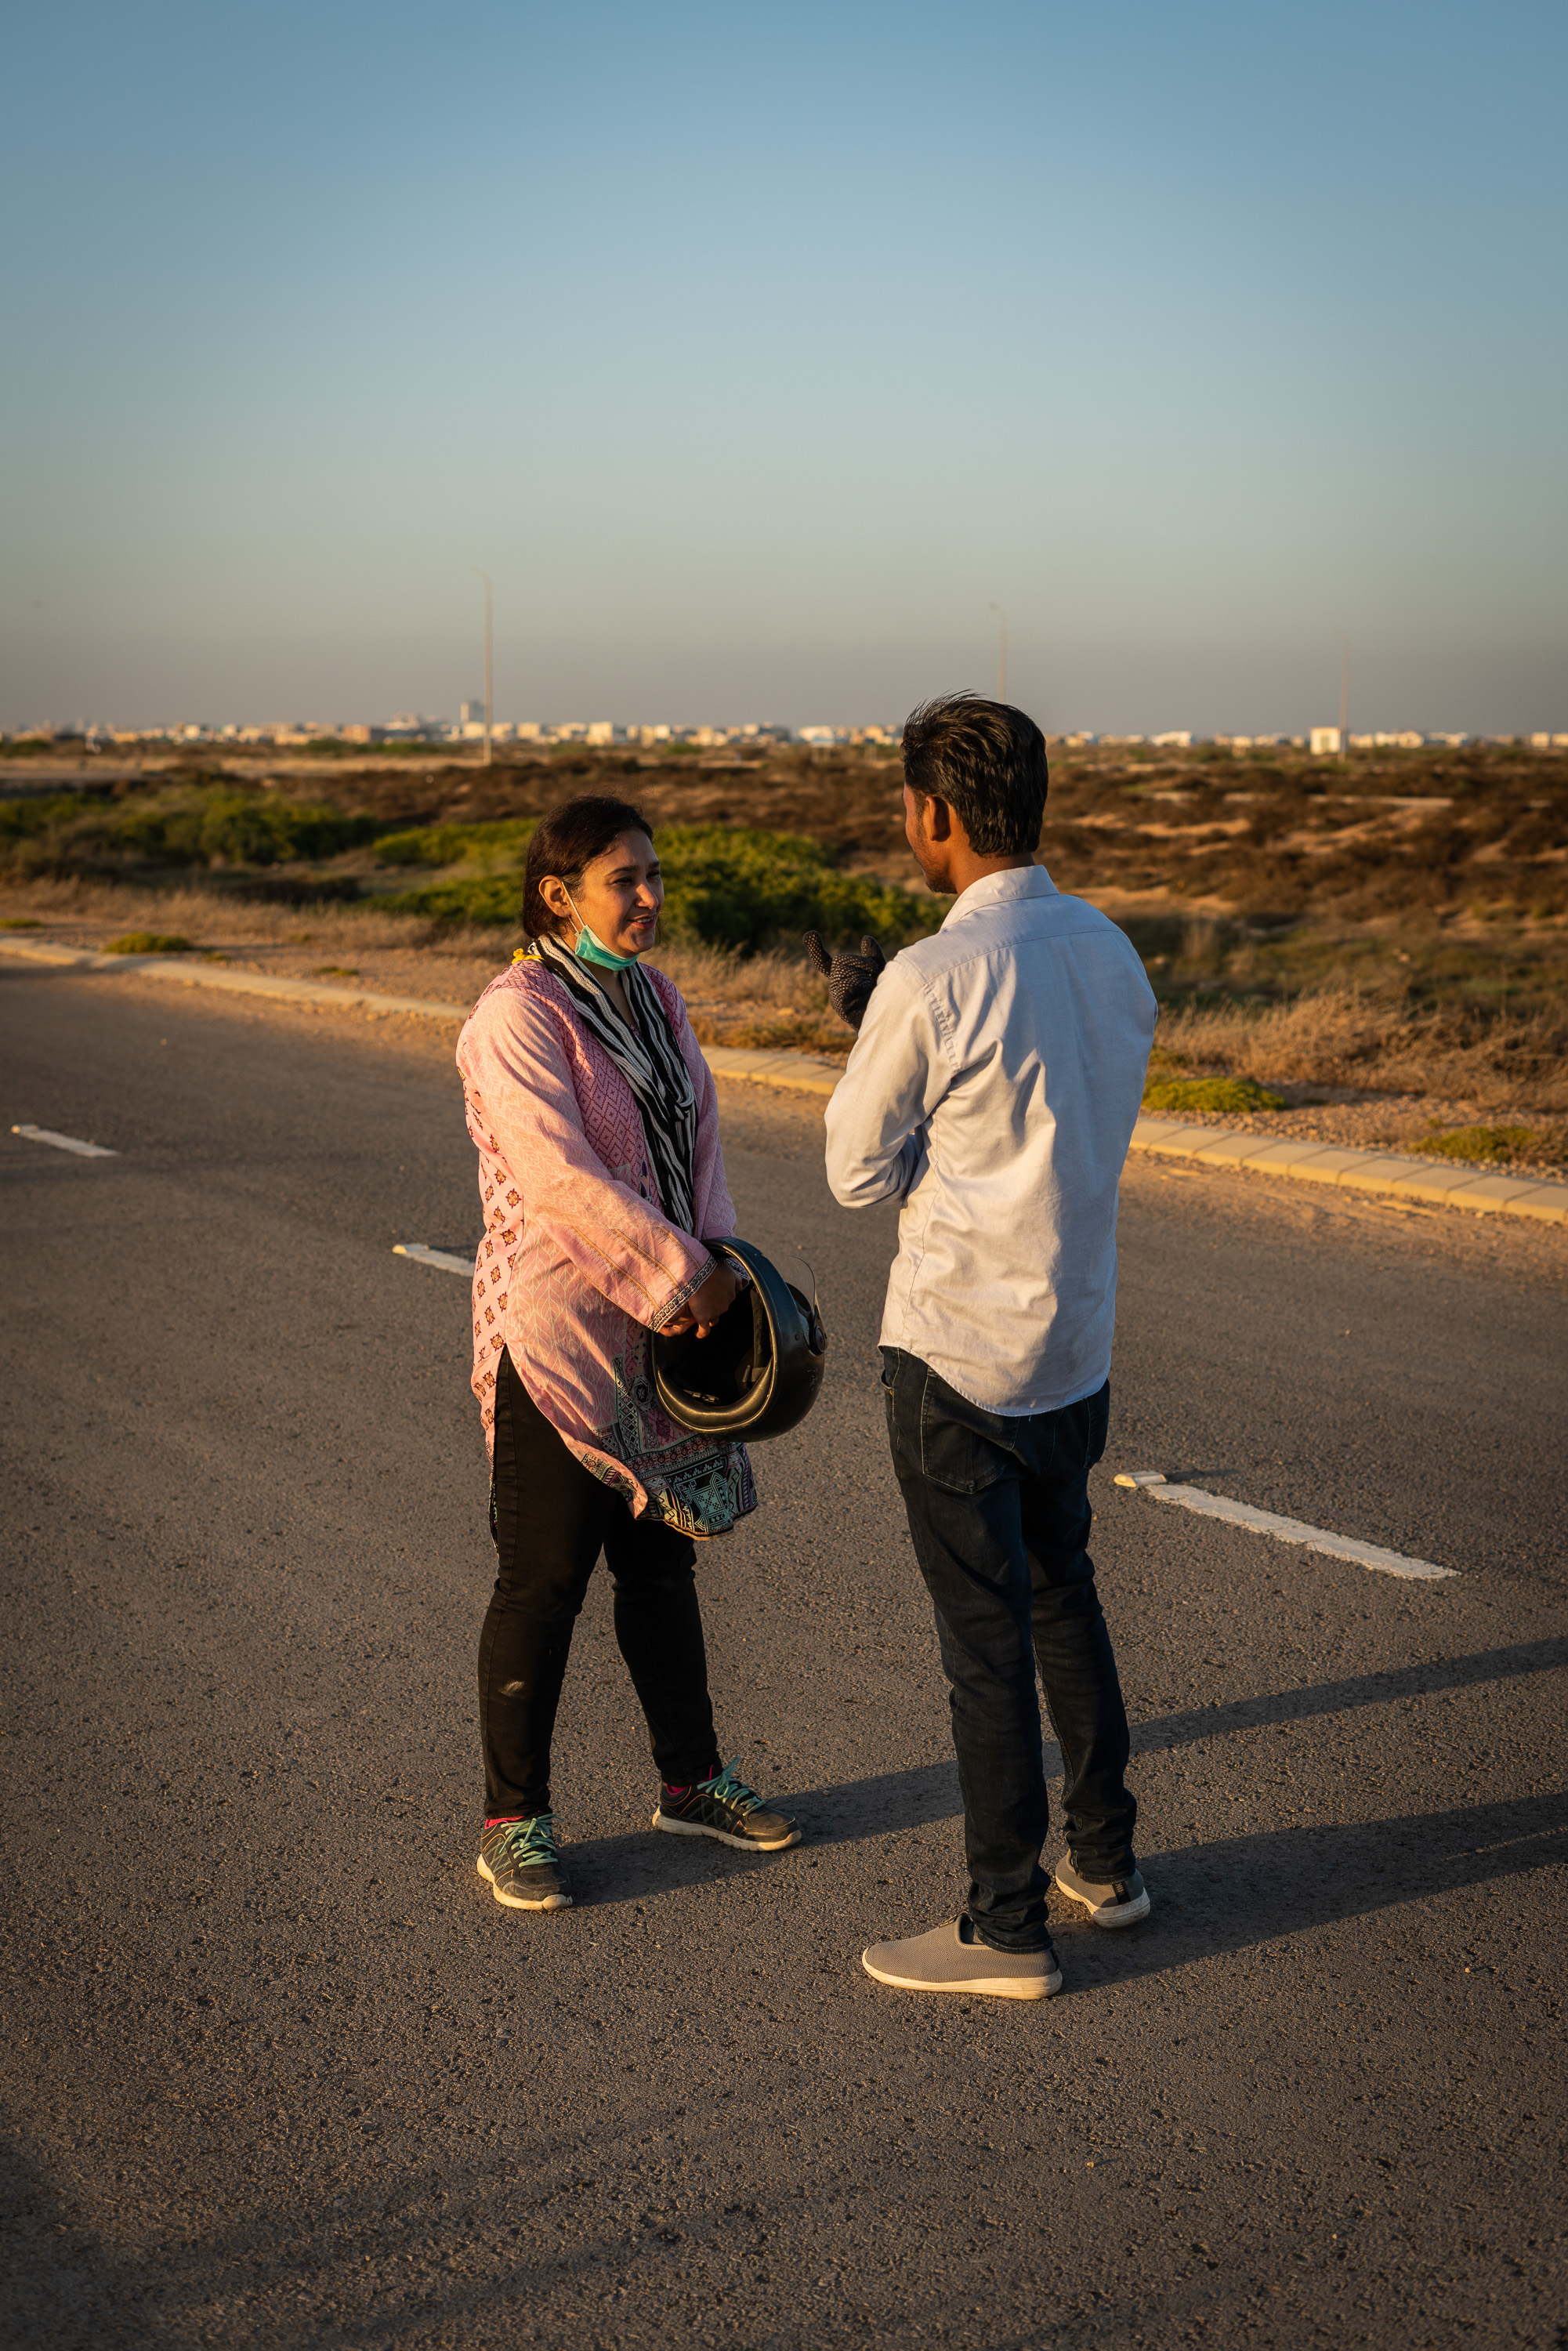 Sana Yacoob and a driving instructor from the Pink Riders confer during a driving lesson in Karachi, Pakistan (photo: Philipp Breu)